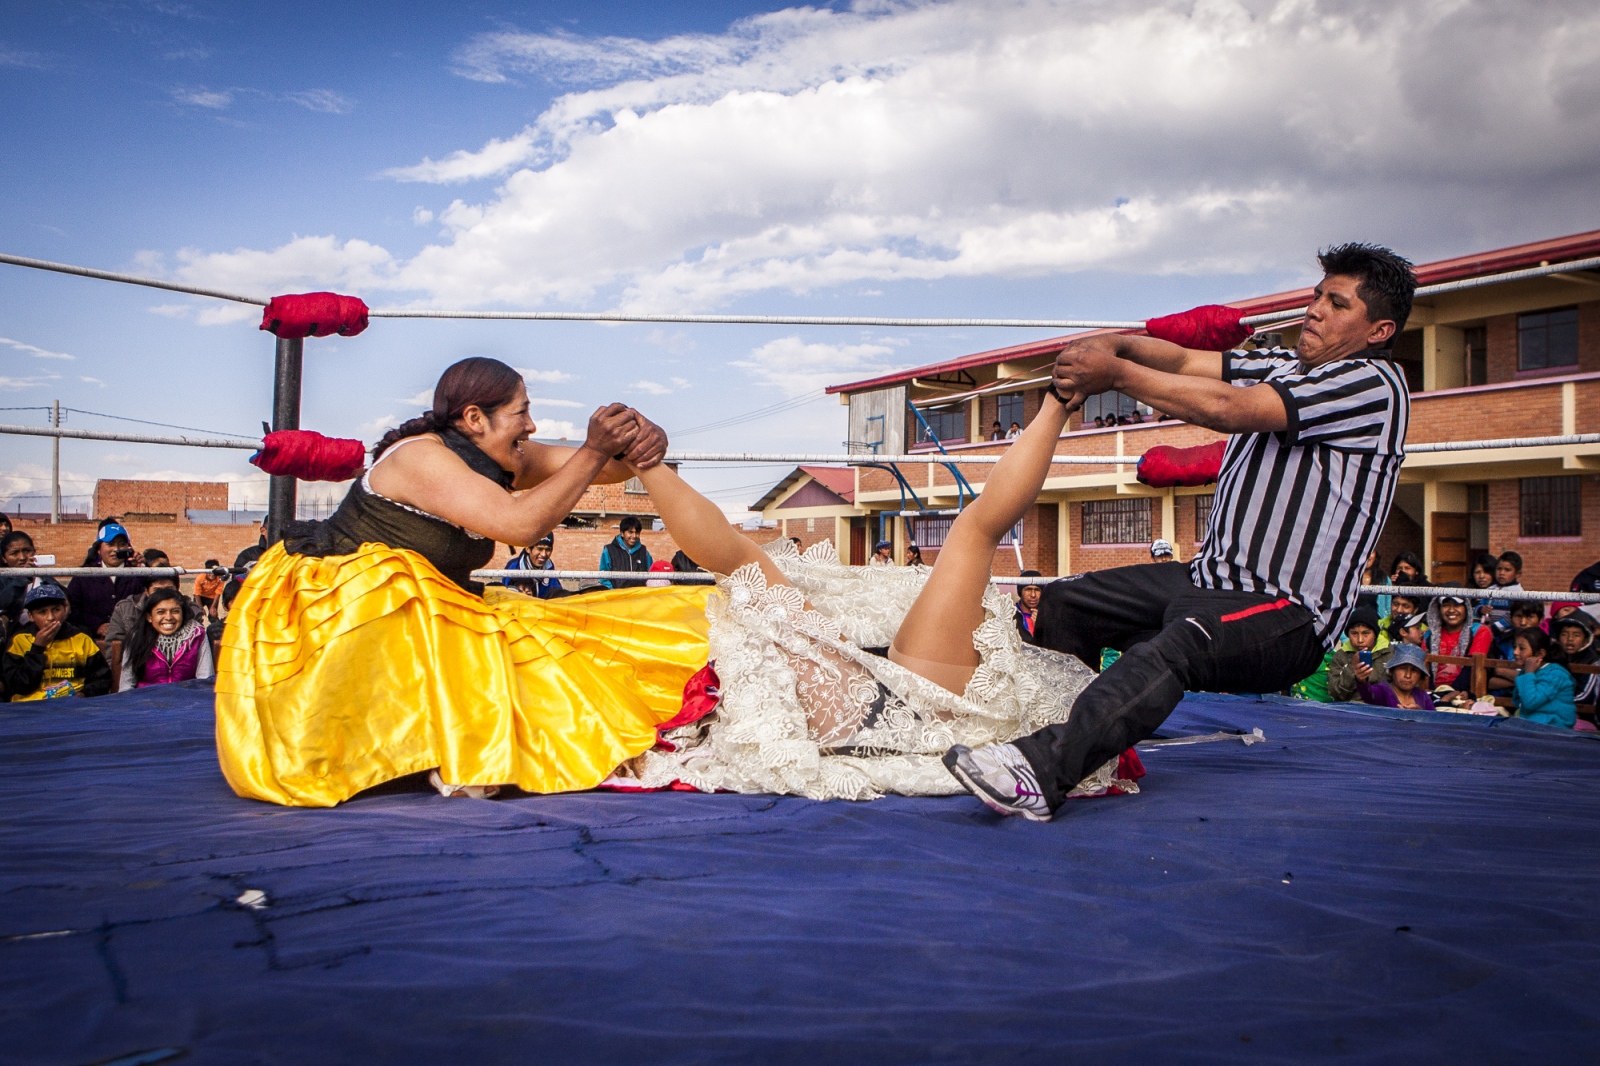  Silvina La Poderosa, 37, and the referee punish Reyna Torres during an exhibition fight in Senkata. Cholitas fights have always the dramatic storyline that the referee is there to help the bad cholita and usually he even participates in it. But as in many other stories, most of the time the good one tends to win the fight at the end. 